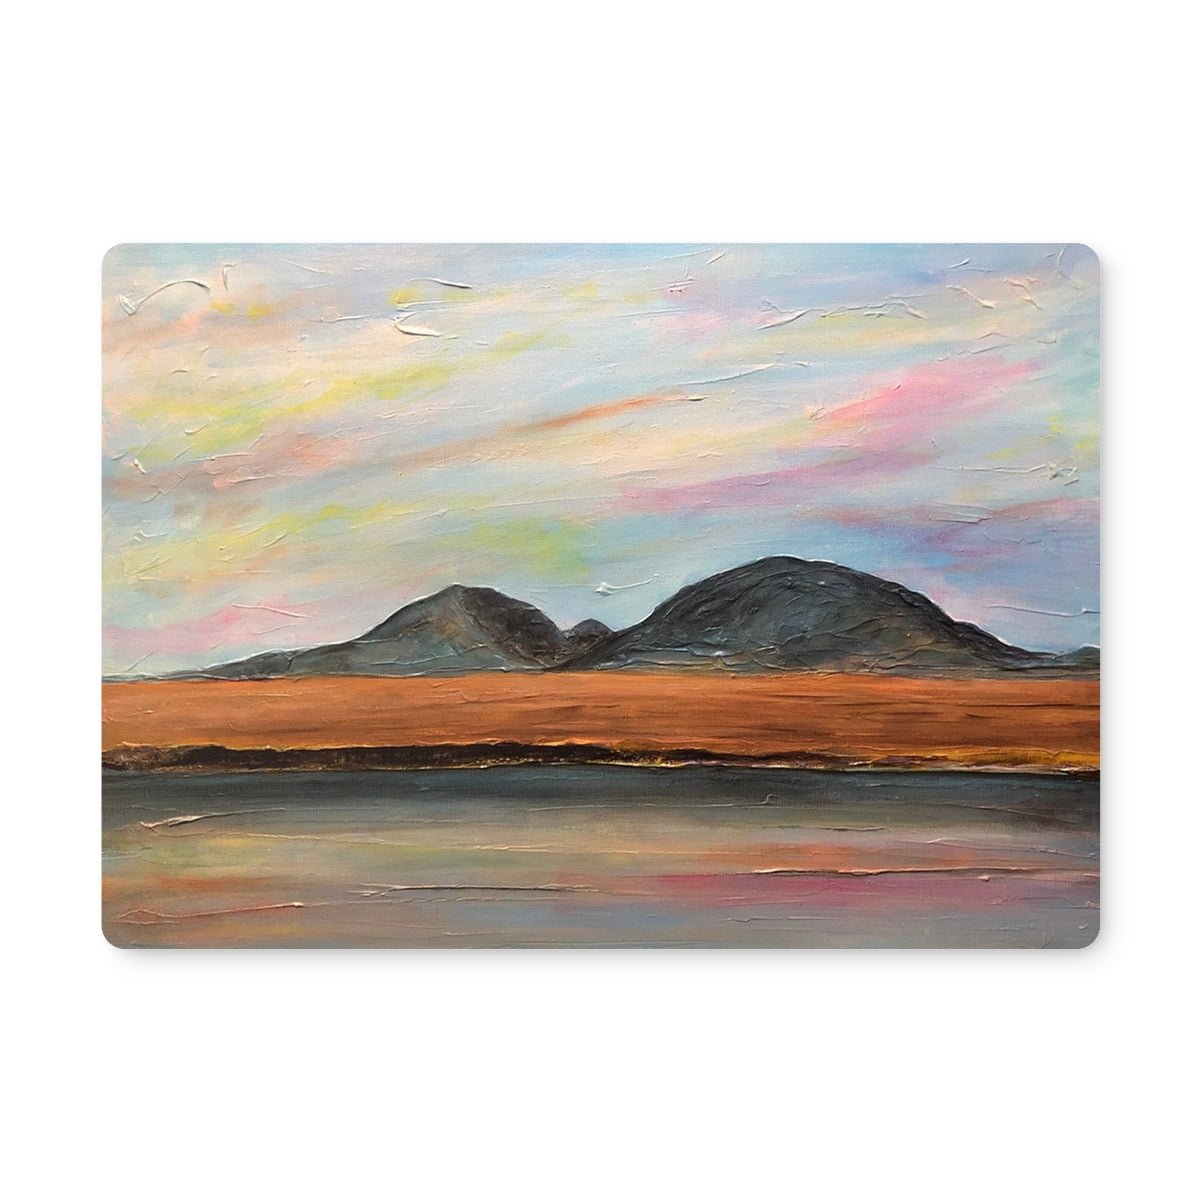 Jura Dawn Art Gifts Placemat-Placemats-Hebridean Islands Art Gallery-Single Placemat-Paintings, Prints, Homeware, Art Gifts From Scotland By Scottish Artist Kevin Hunter